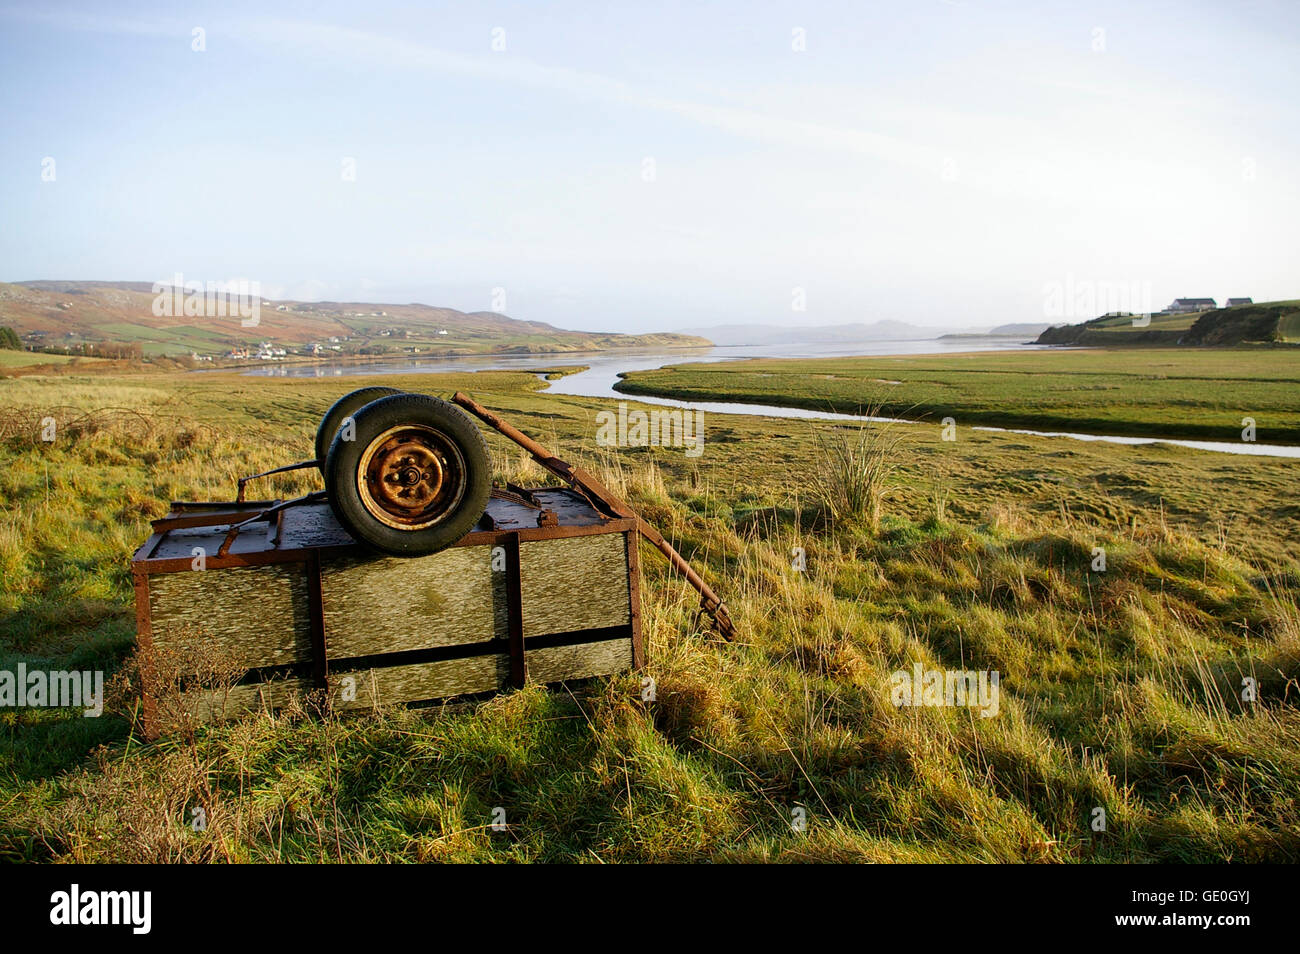 Green field and meandering river in Donegal, Ireland, with an overturned cart or trailer in the foreground Stock Photo